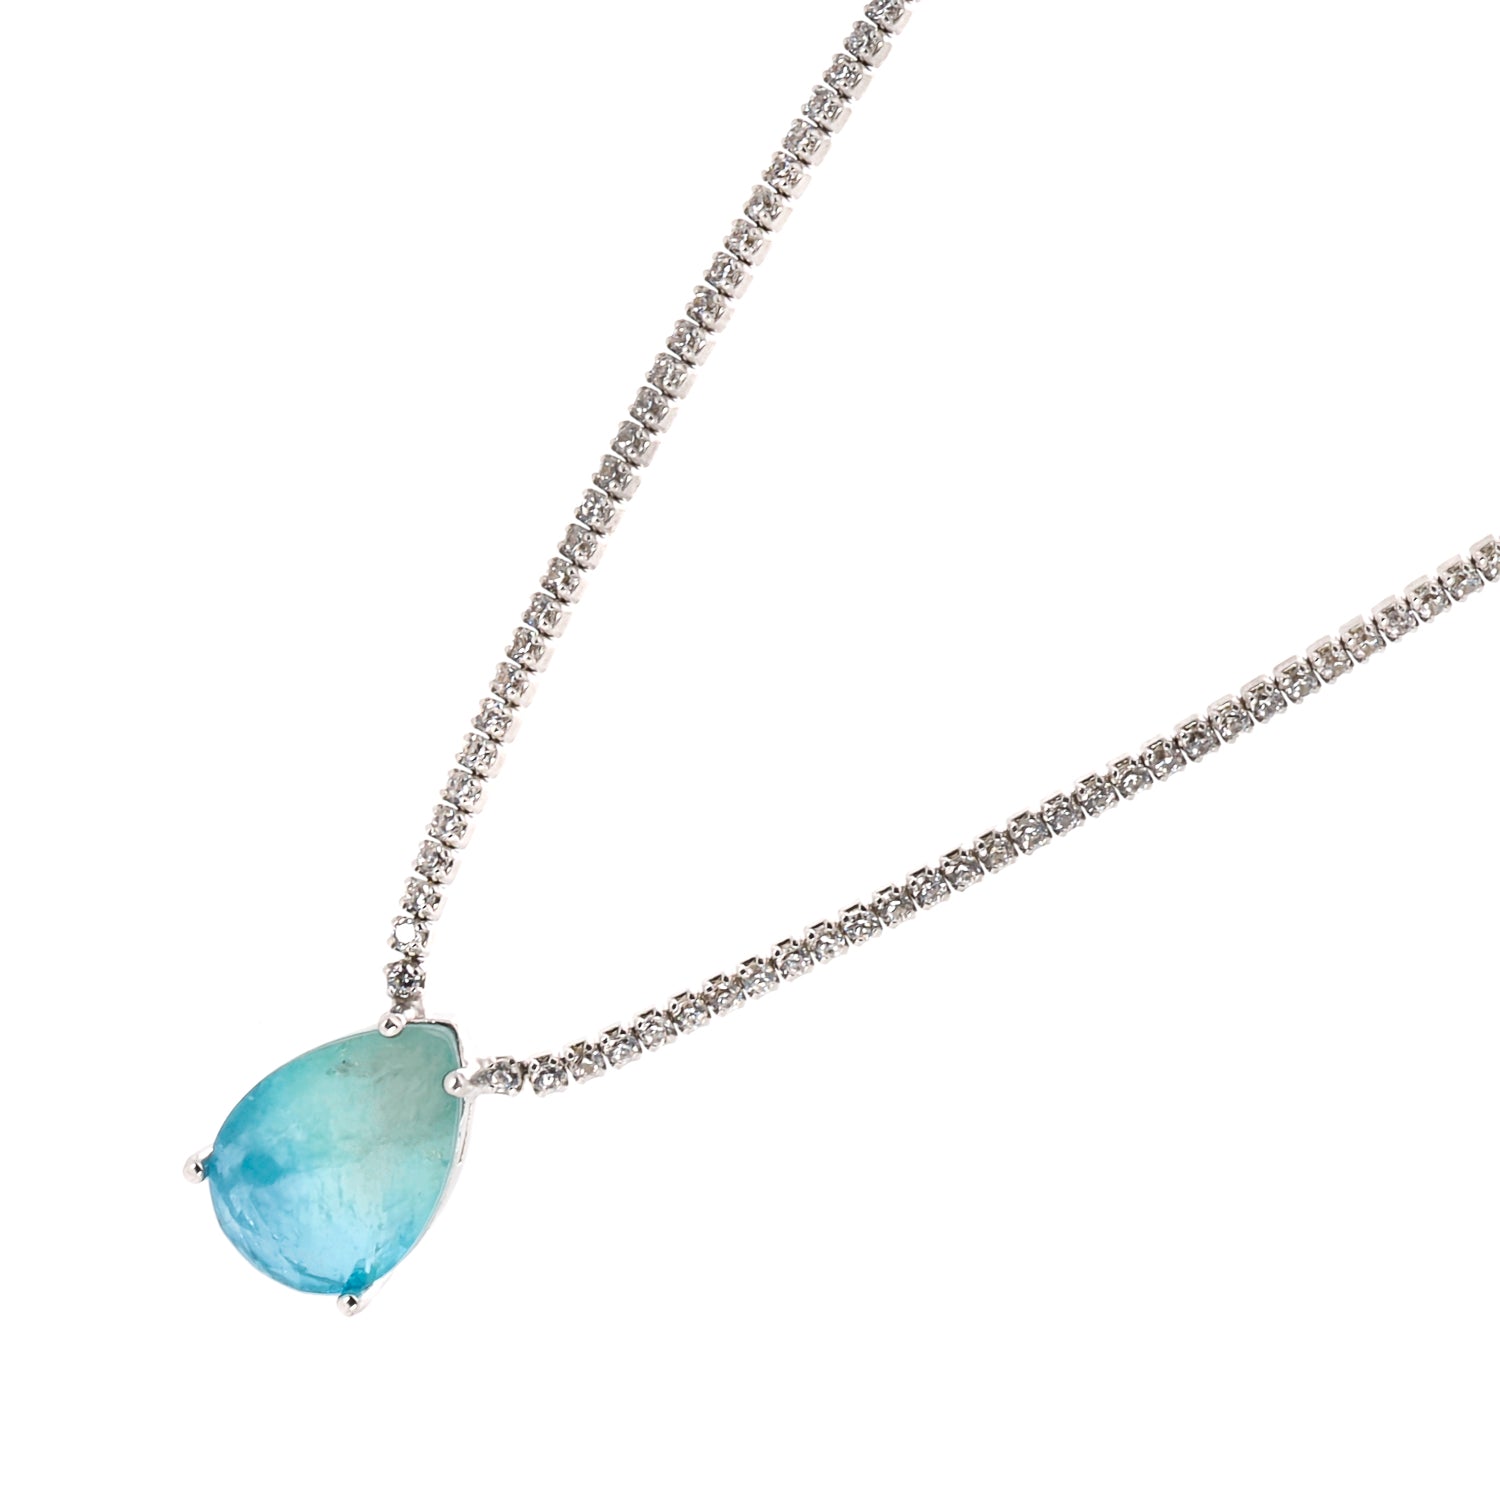 Celebration of Happiness: Sterling Silver Necklace with Teardrop Pendant